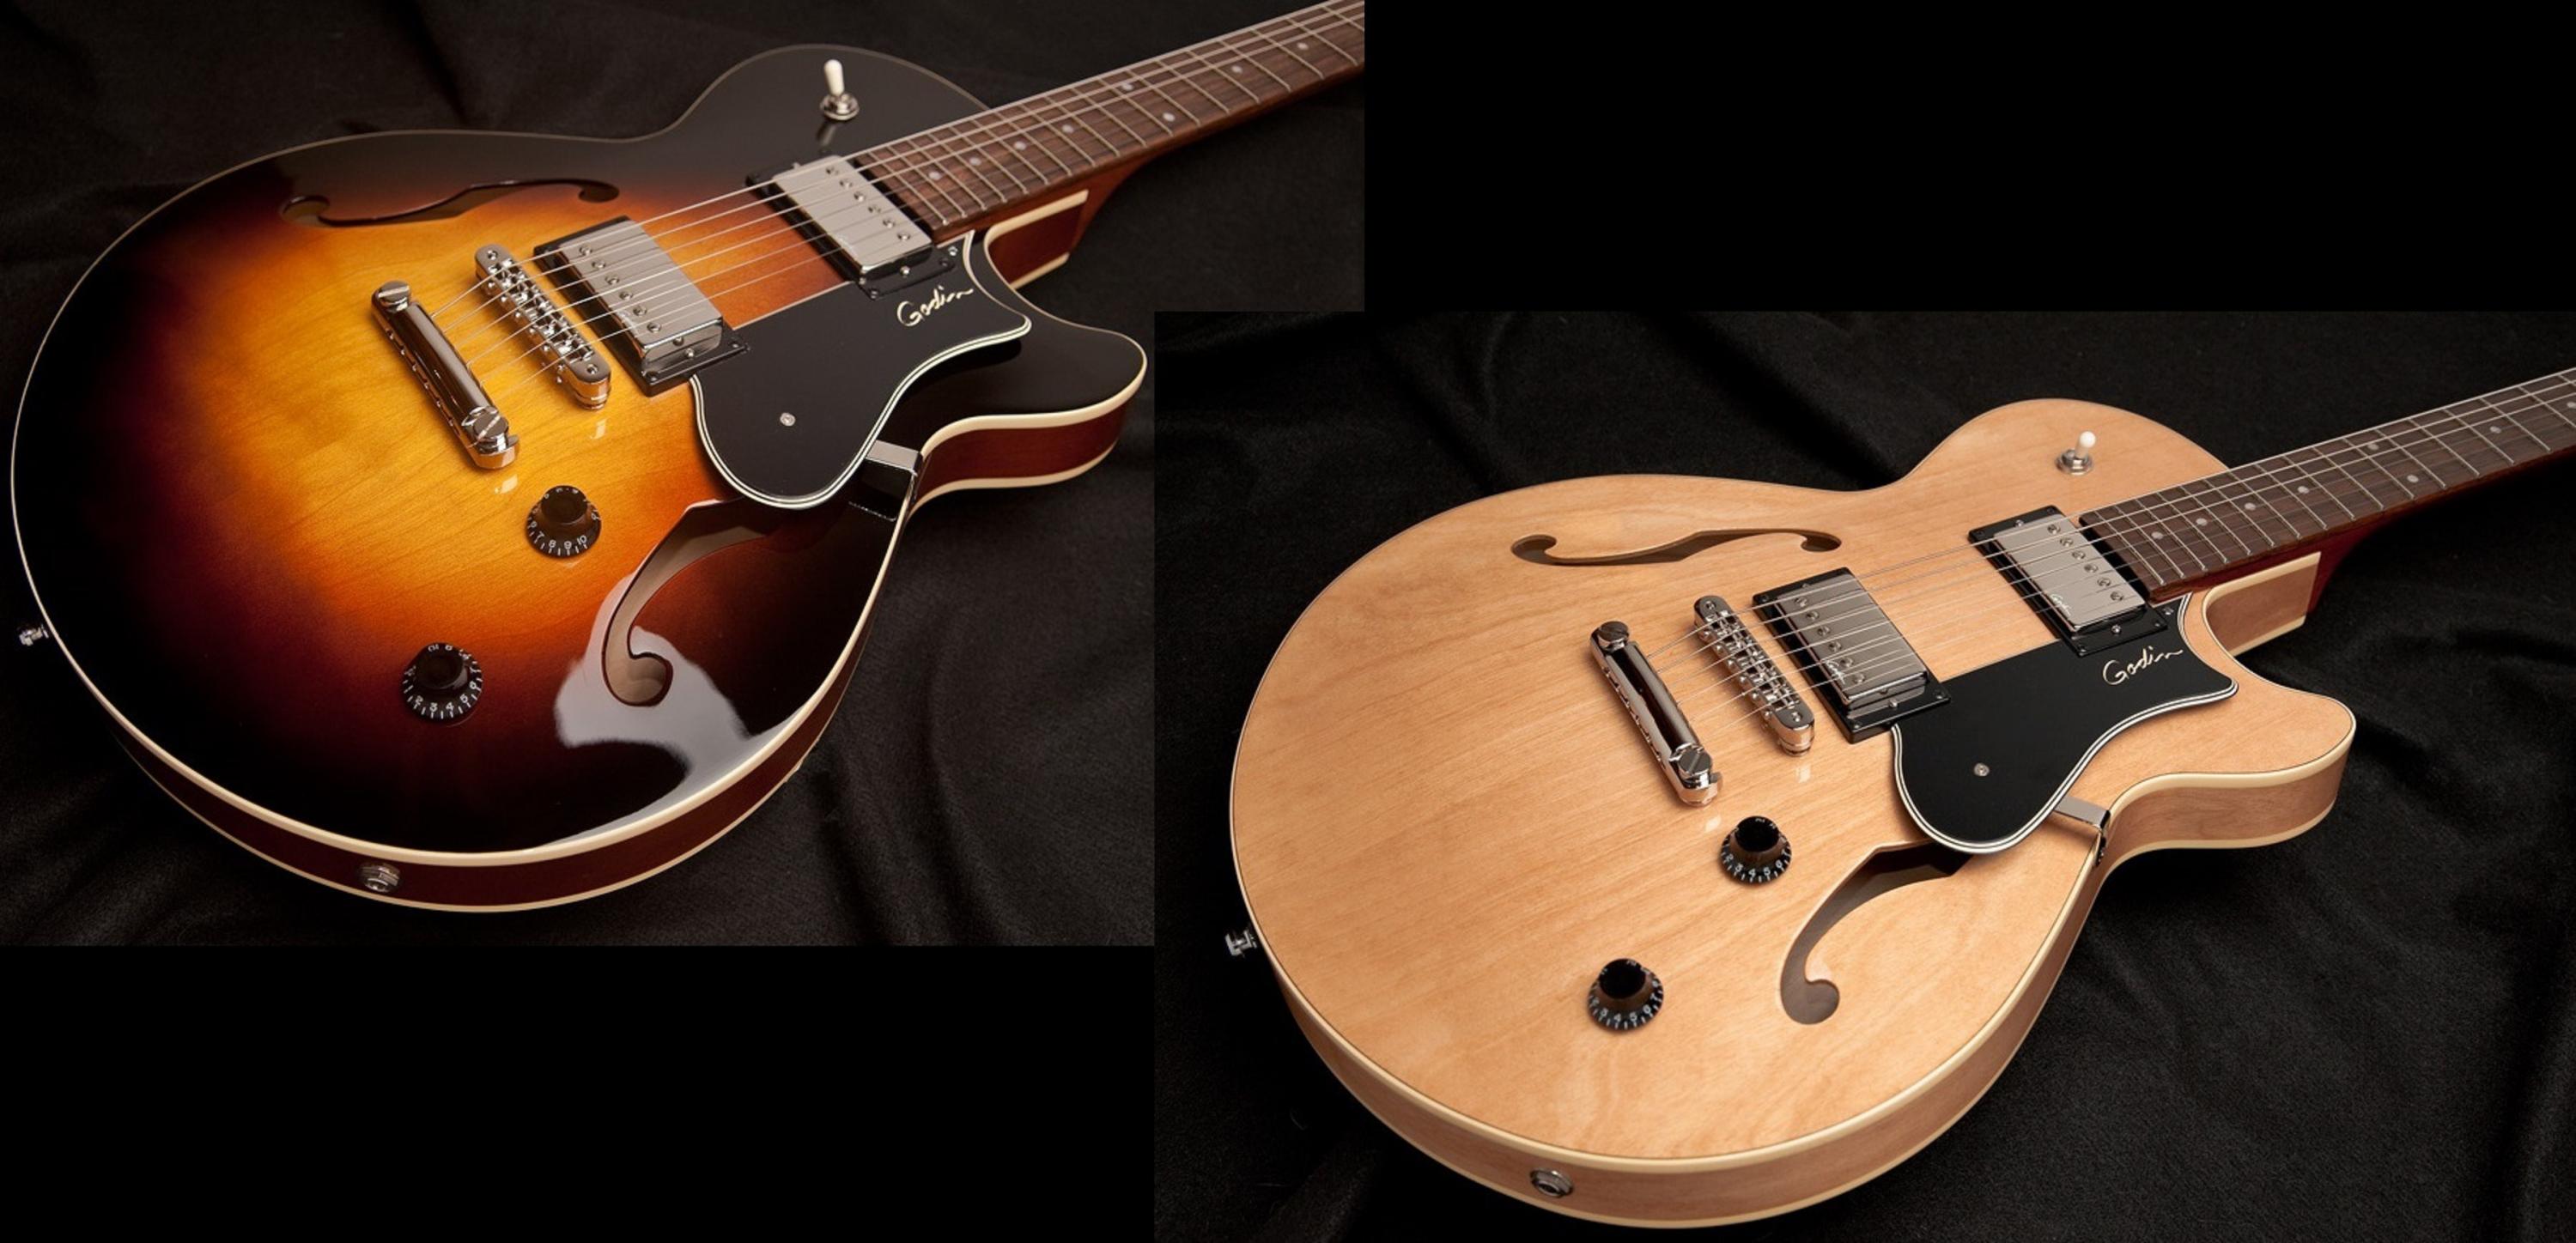 Thinking about upgrading my Montreal Premiere ... maybe-godin-montreal-premiere-x-2-jpg